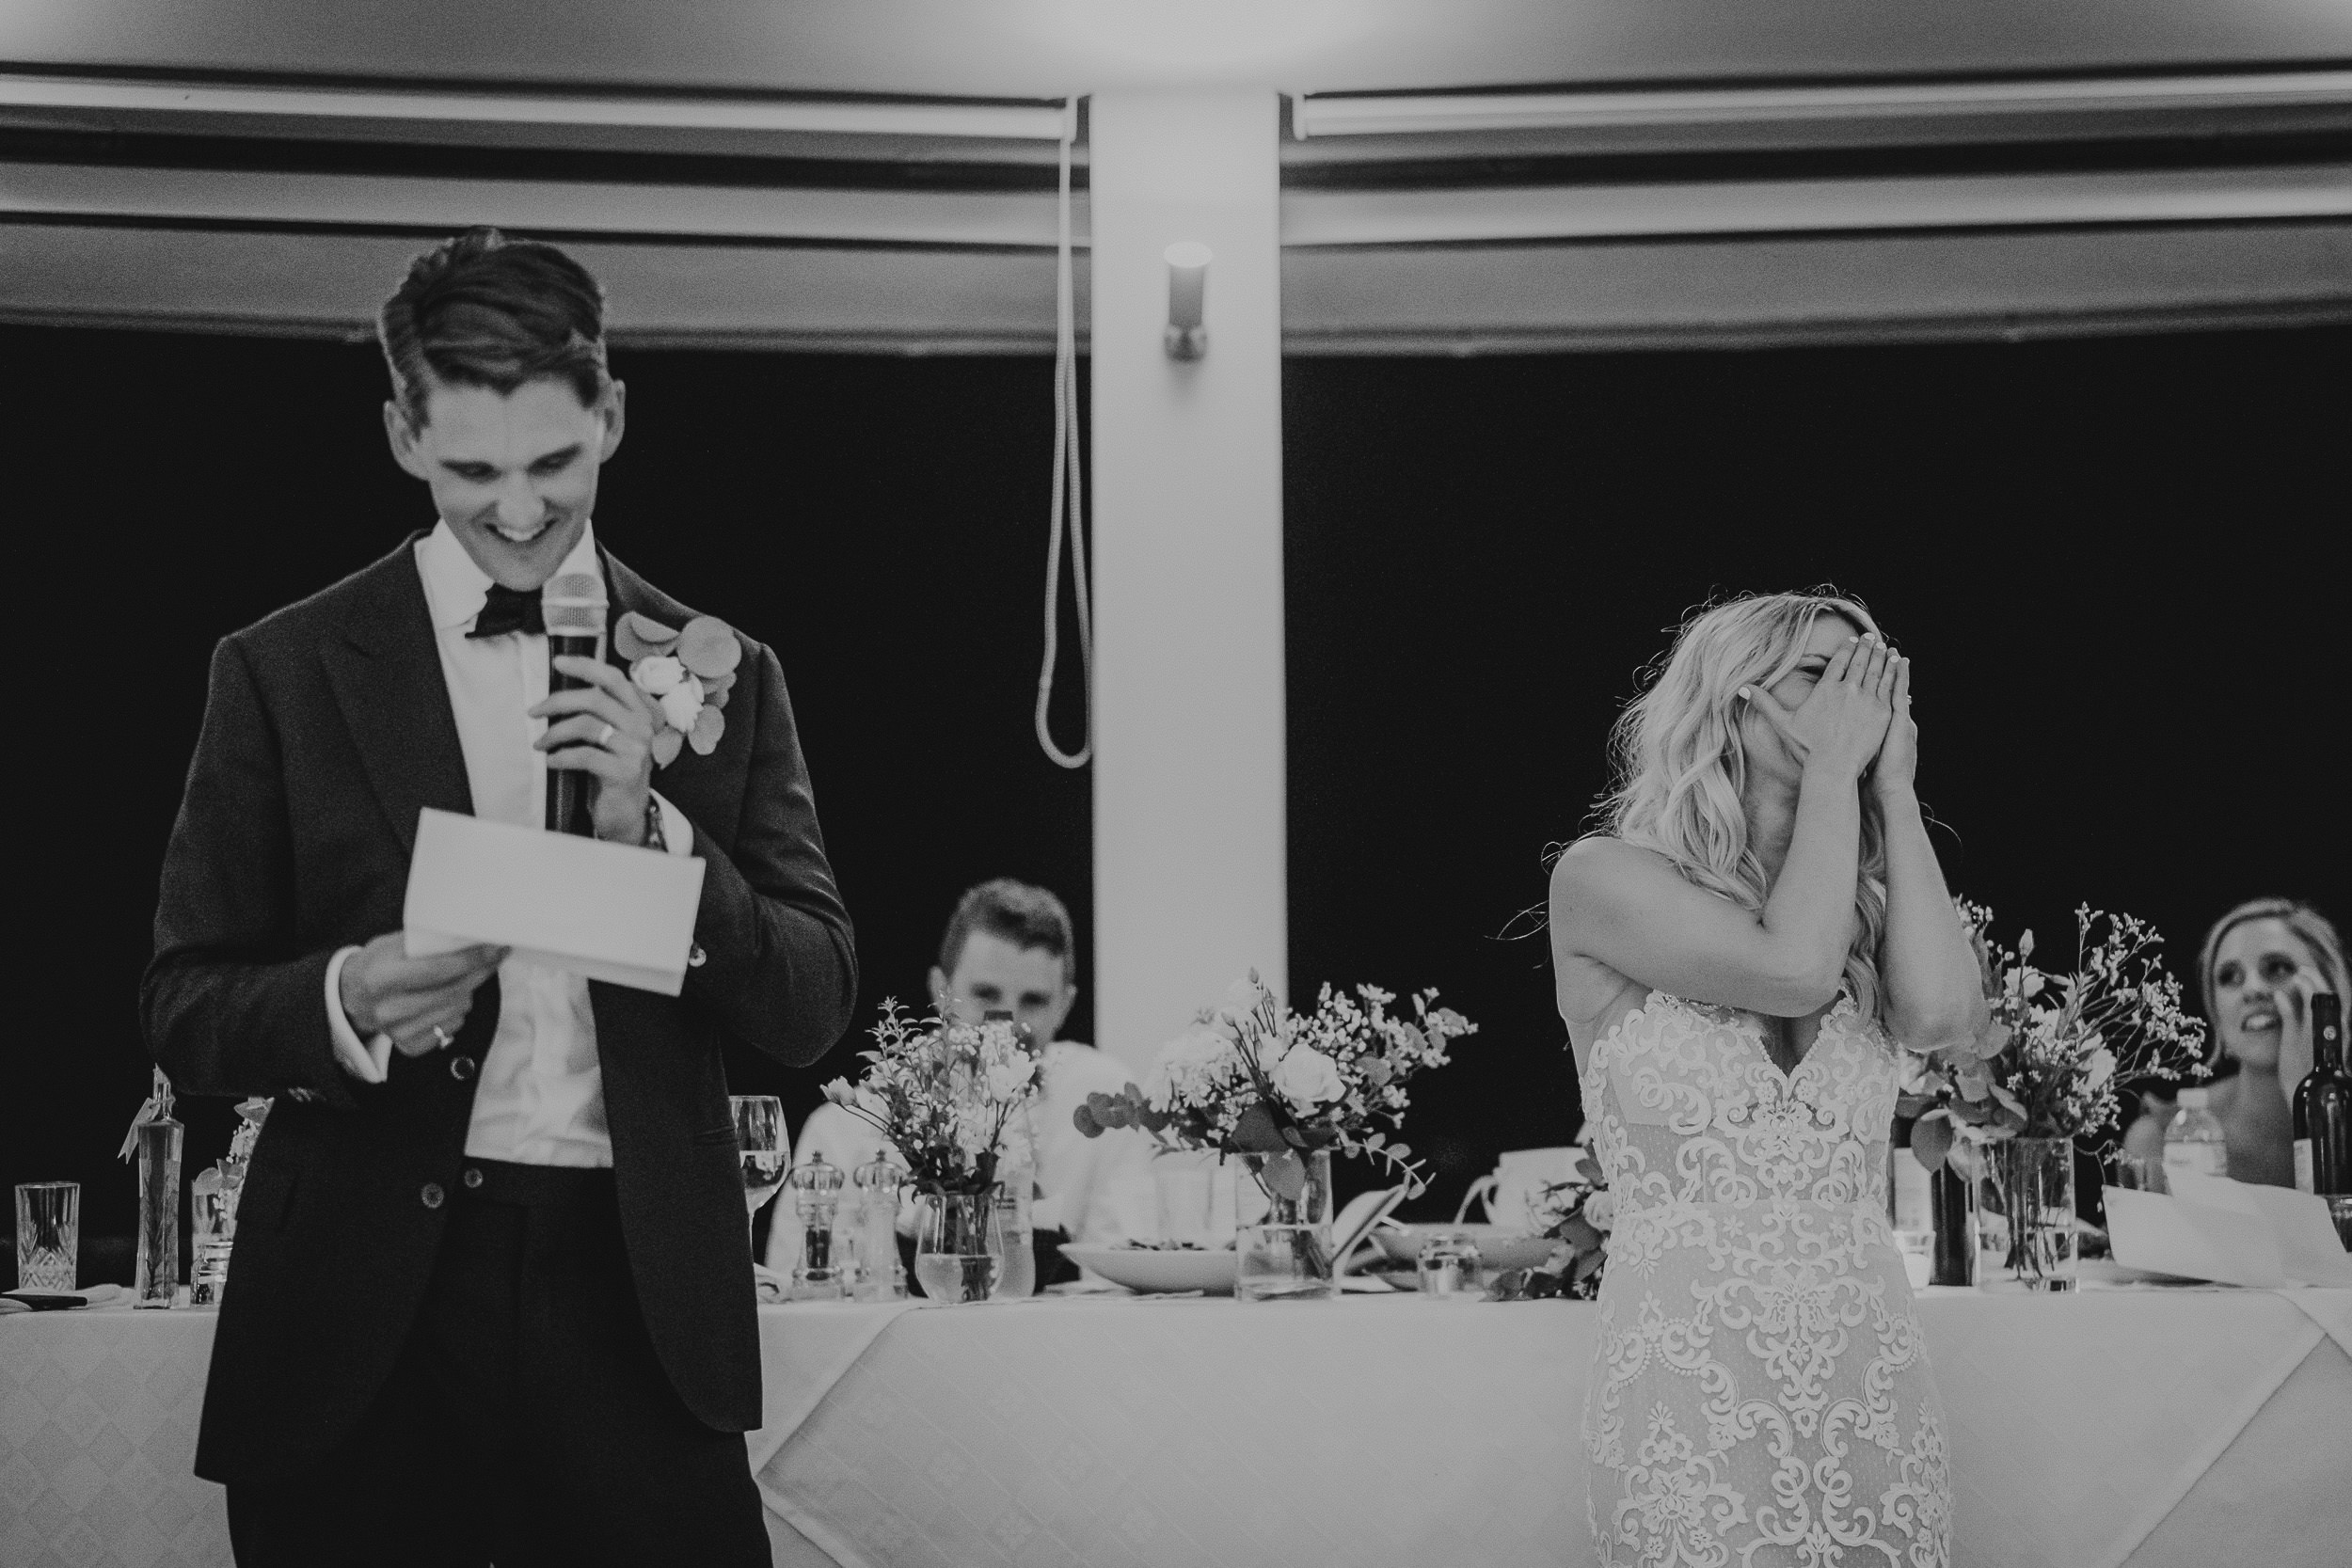 A bride and groom joyfully sharing laughter during their wedding speech, captured by the wedding photographer.